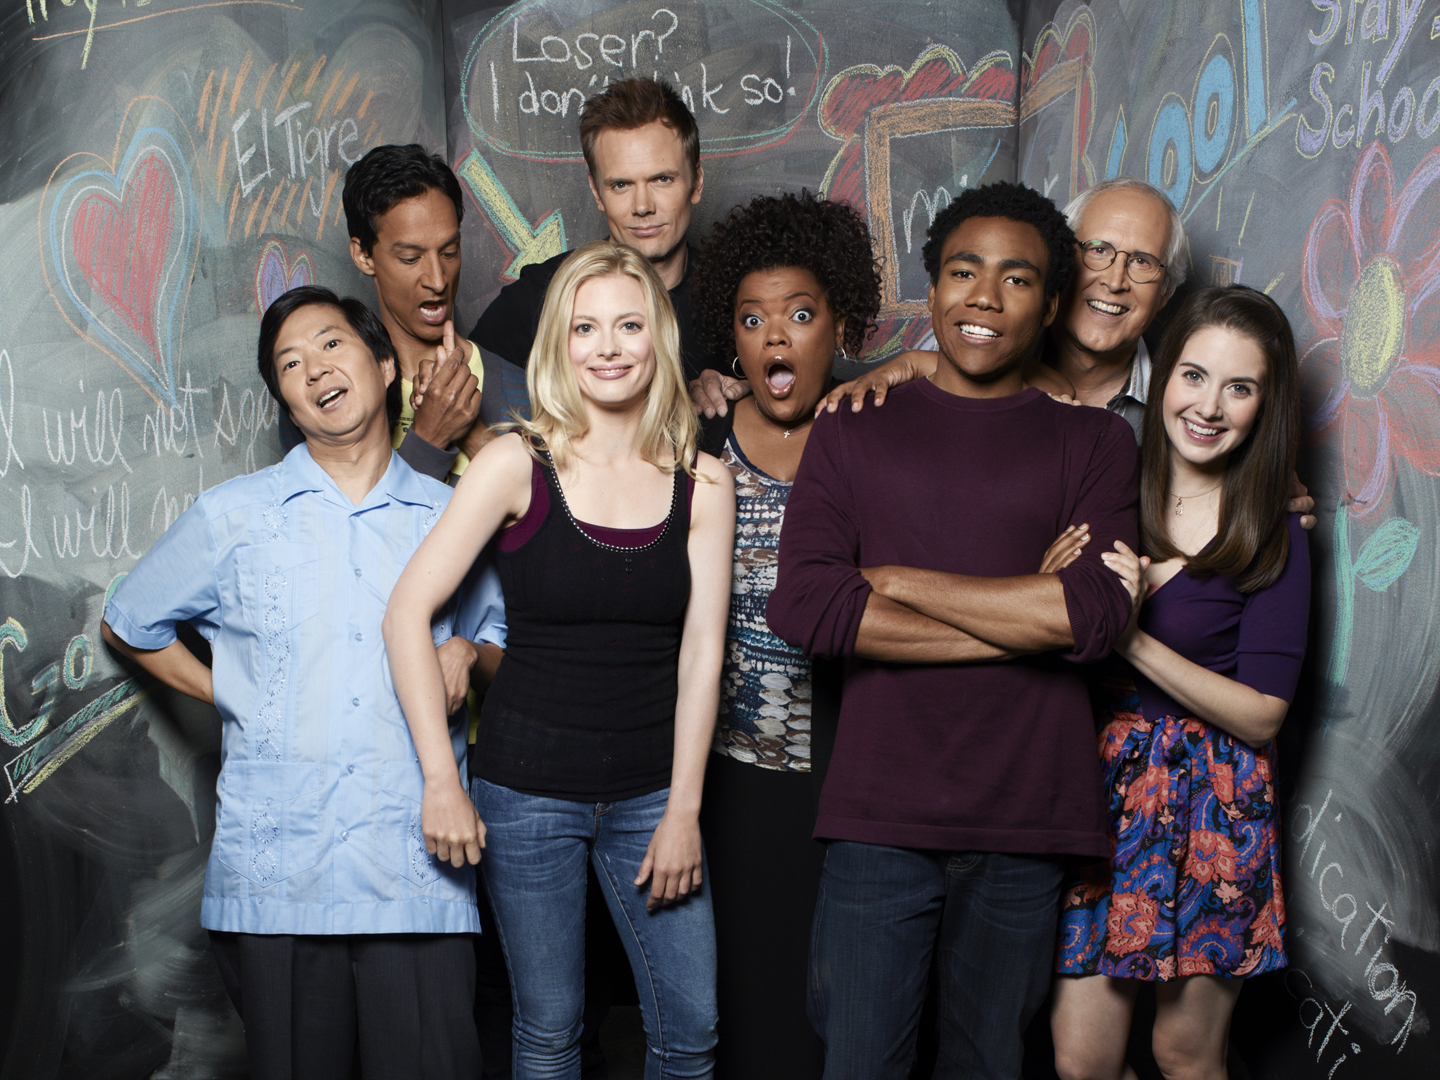 Reflections on (Probably) The Final Episode of “Community”